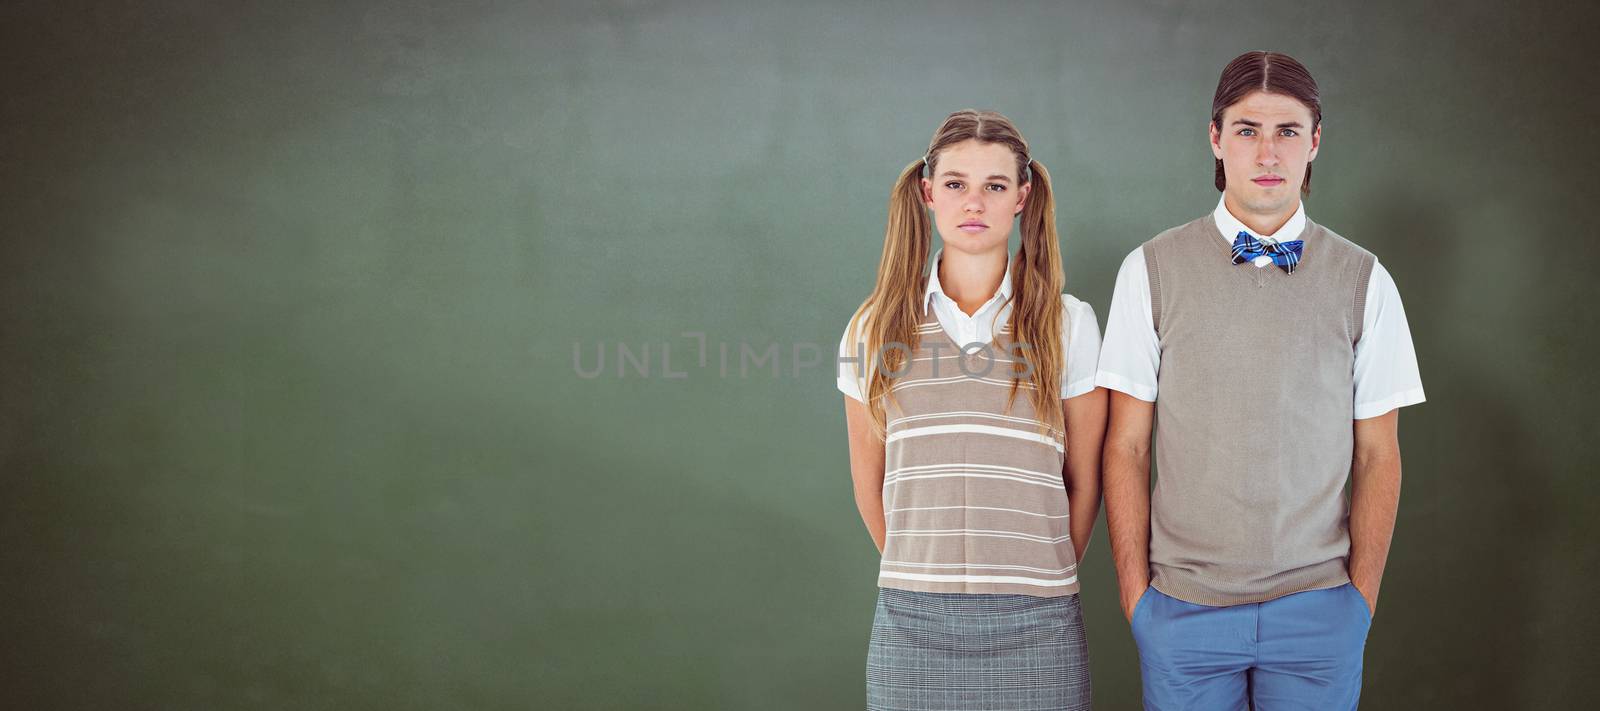 Unsmiling geeky hipsters looking at camera  against green chalkboard